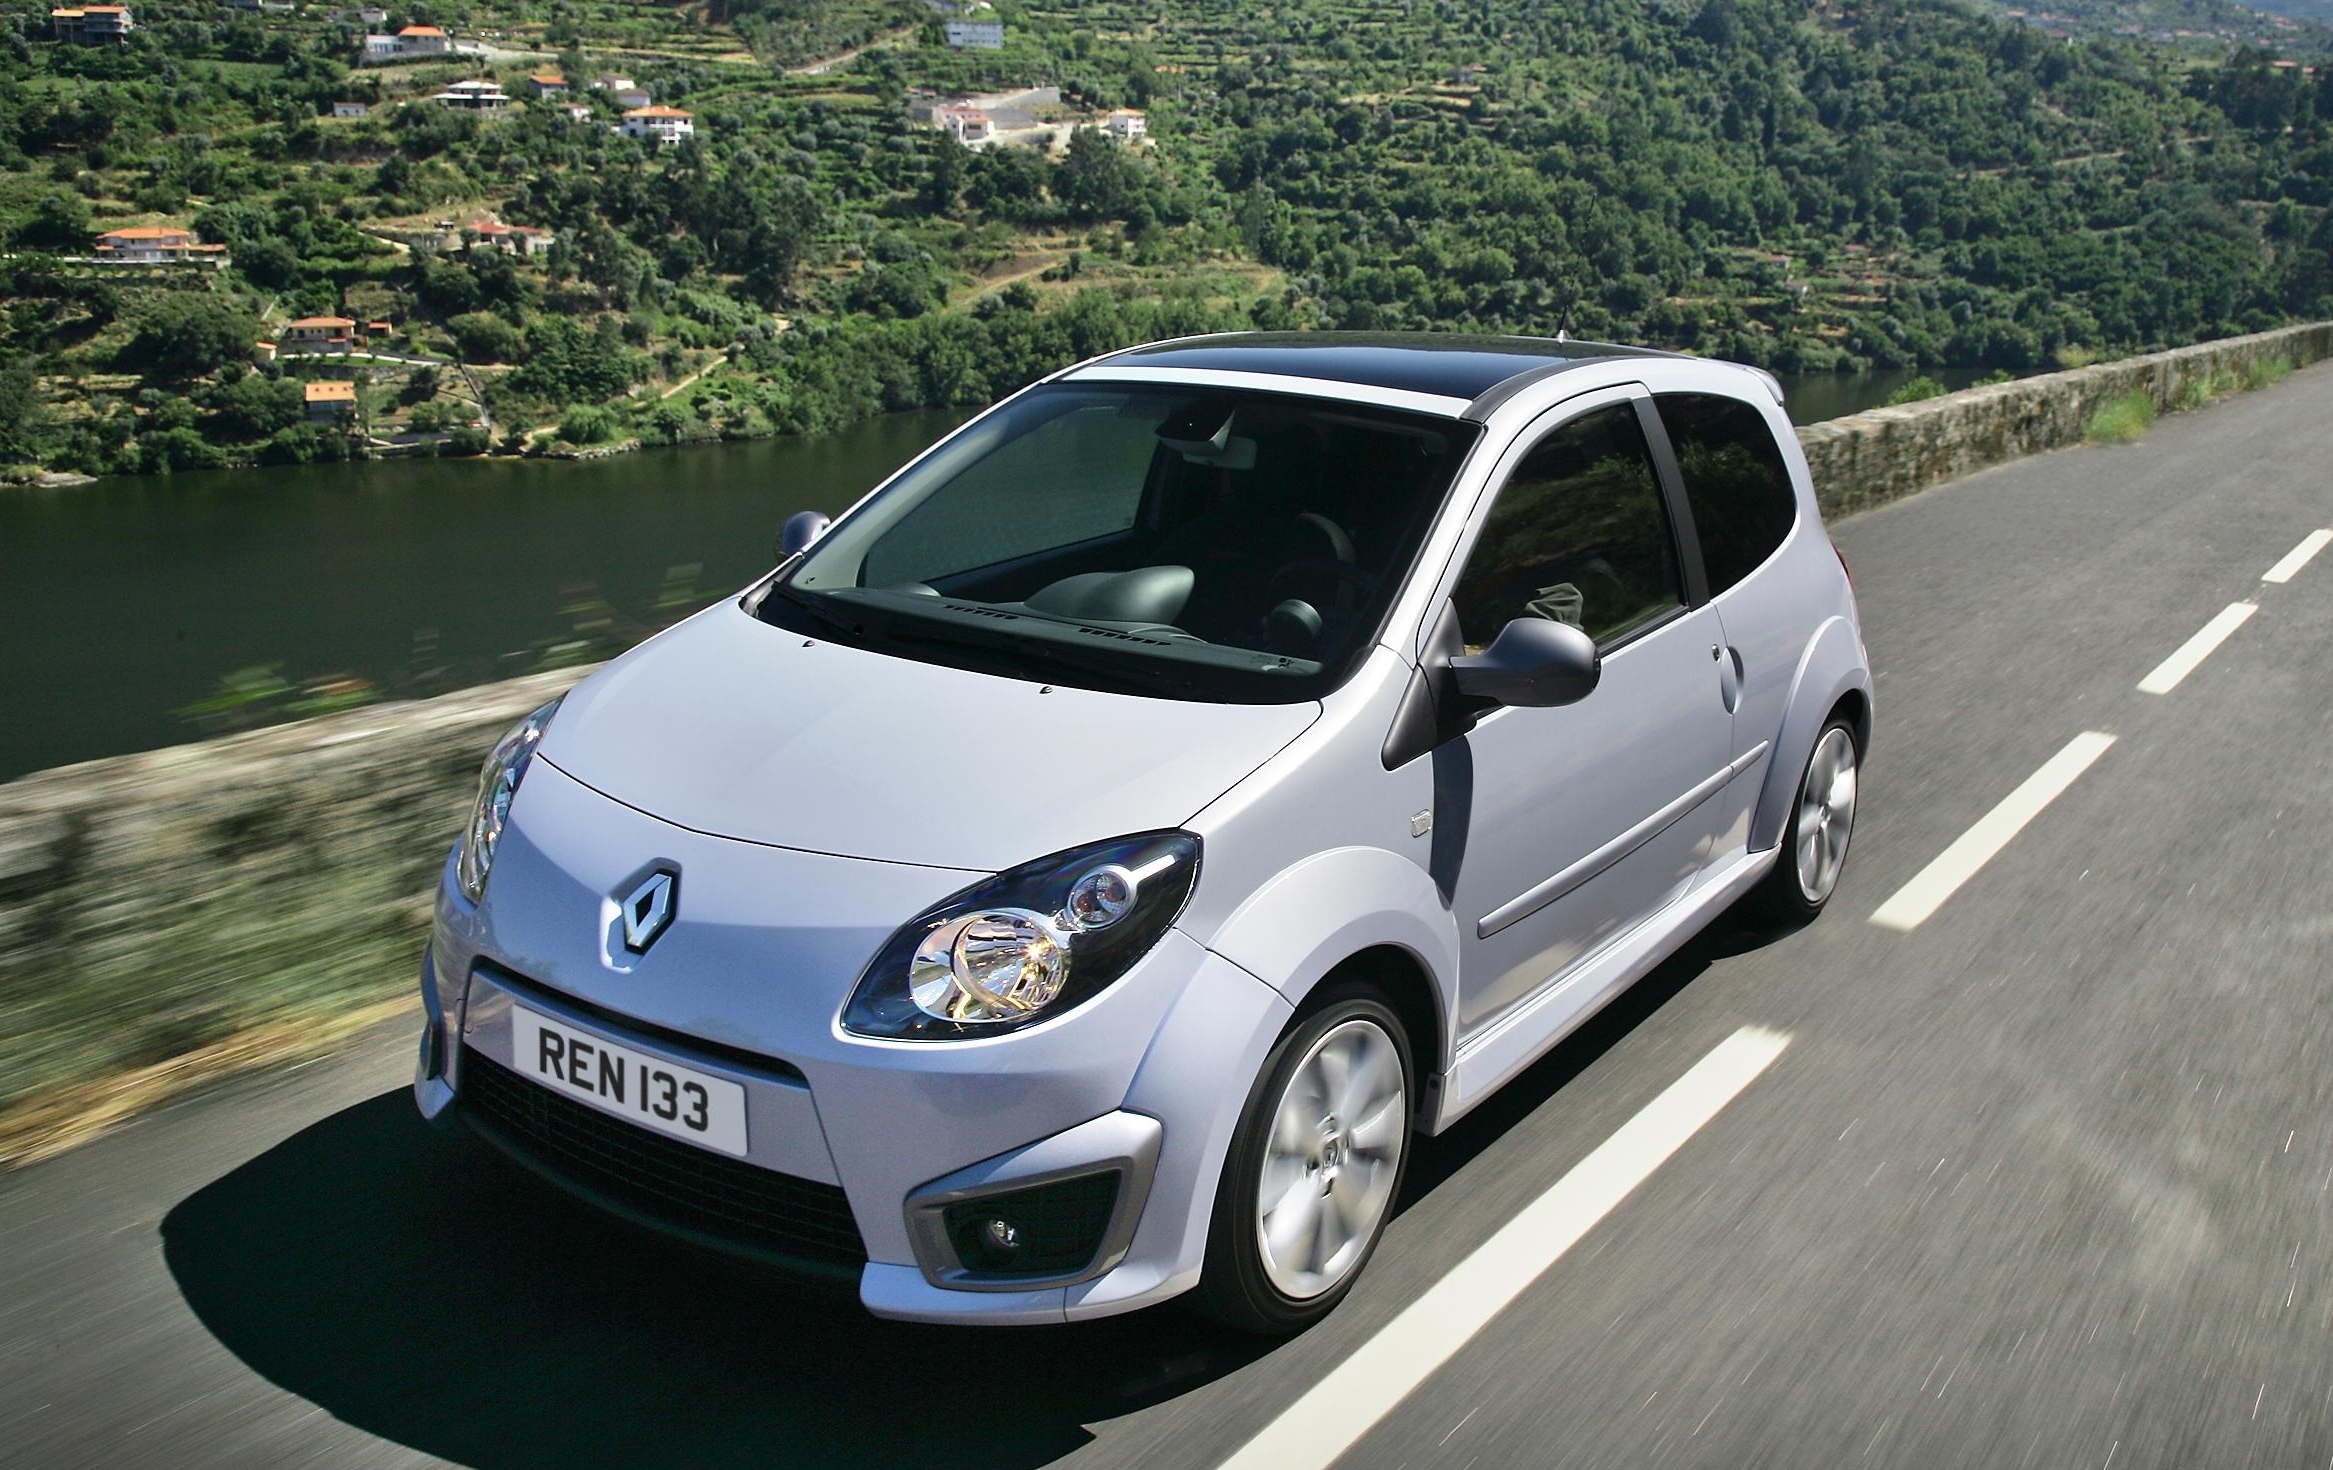 Renaultsport's Twingo was a hoot in the bends